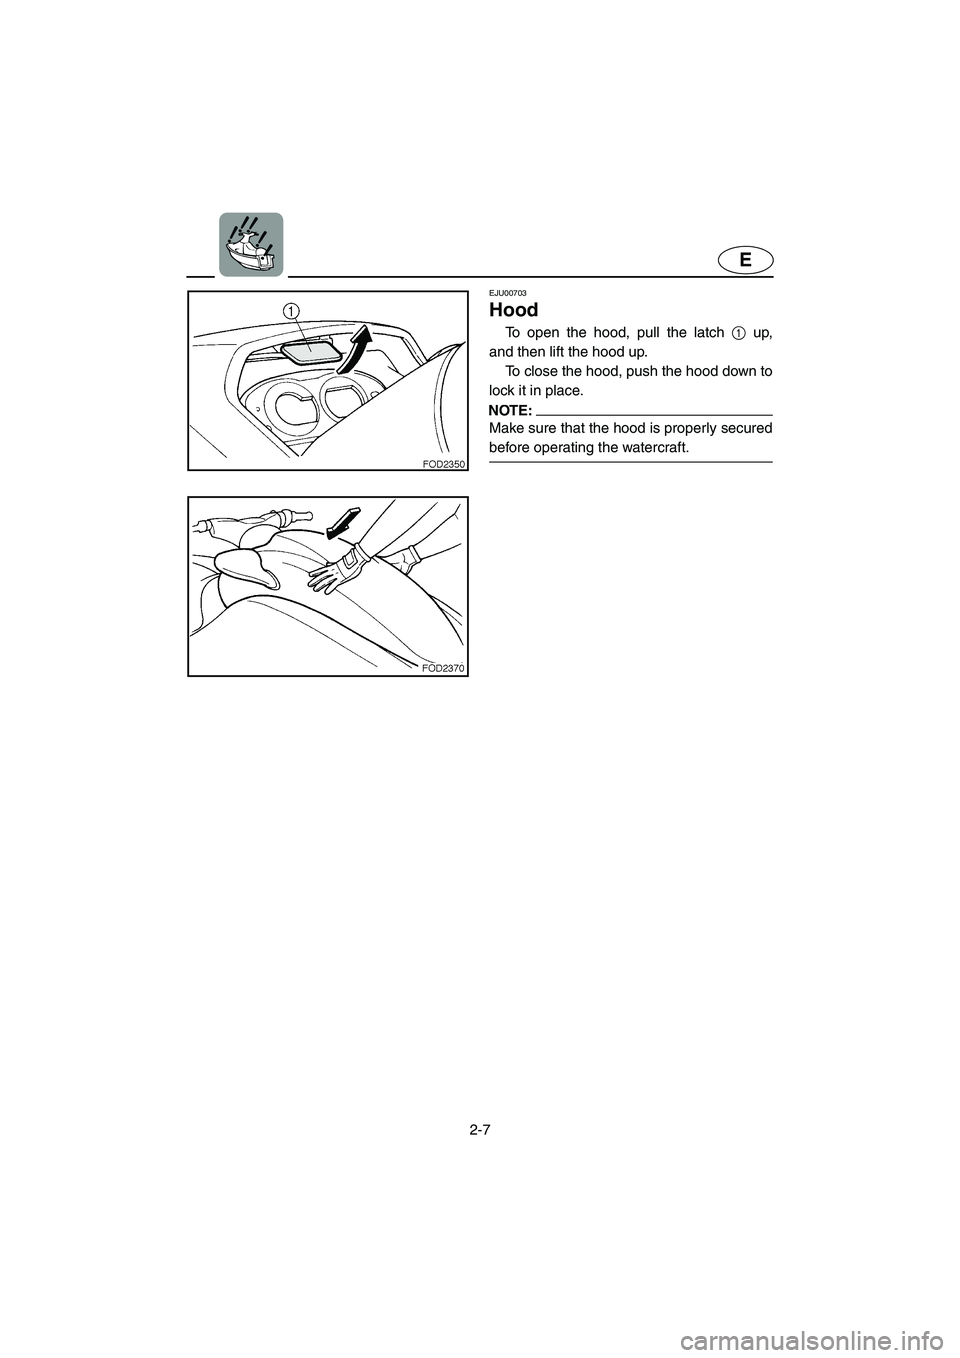 YAMAHA XL 800 2001  Owners Manual 2-7
E
EJU00703
Hood
To open the hood, pull the latch 1 up,
and then lift the hood up.
To close the hood, push the hood down to
lock it in place.
NOTE:
Make sure that the hood is properly secured
befor